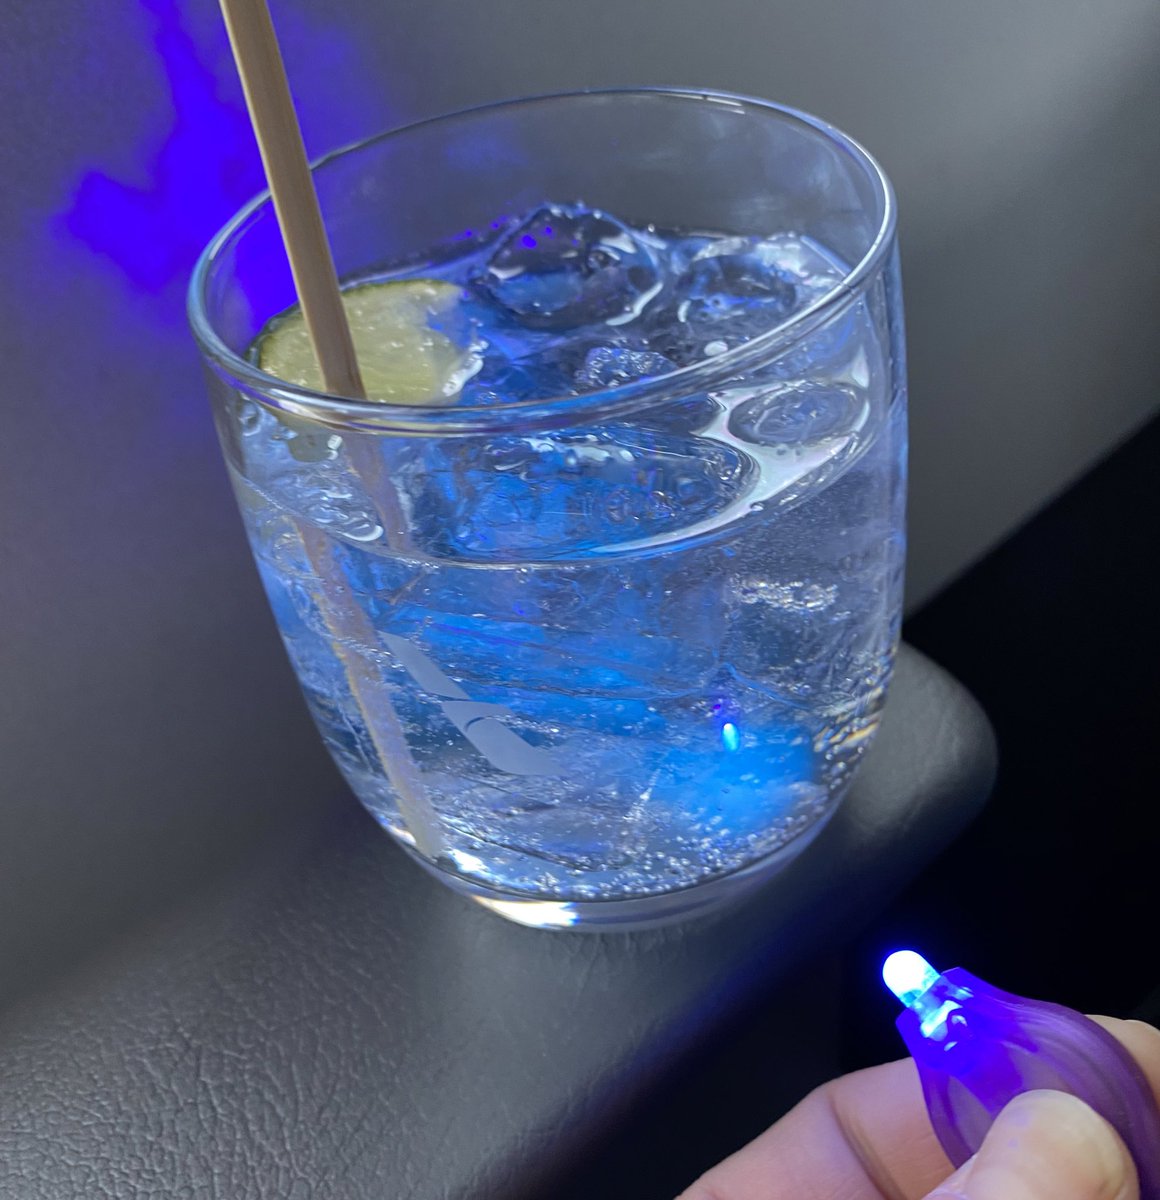 Is this not what everyone does at 30k feet? Bit late for #FluorescenceFriday but I always love my #glowythings